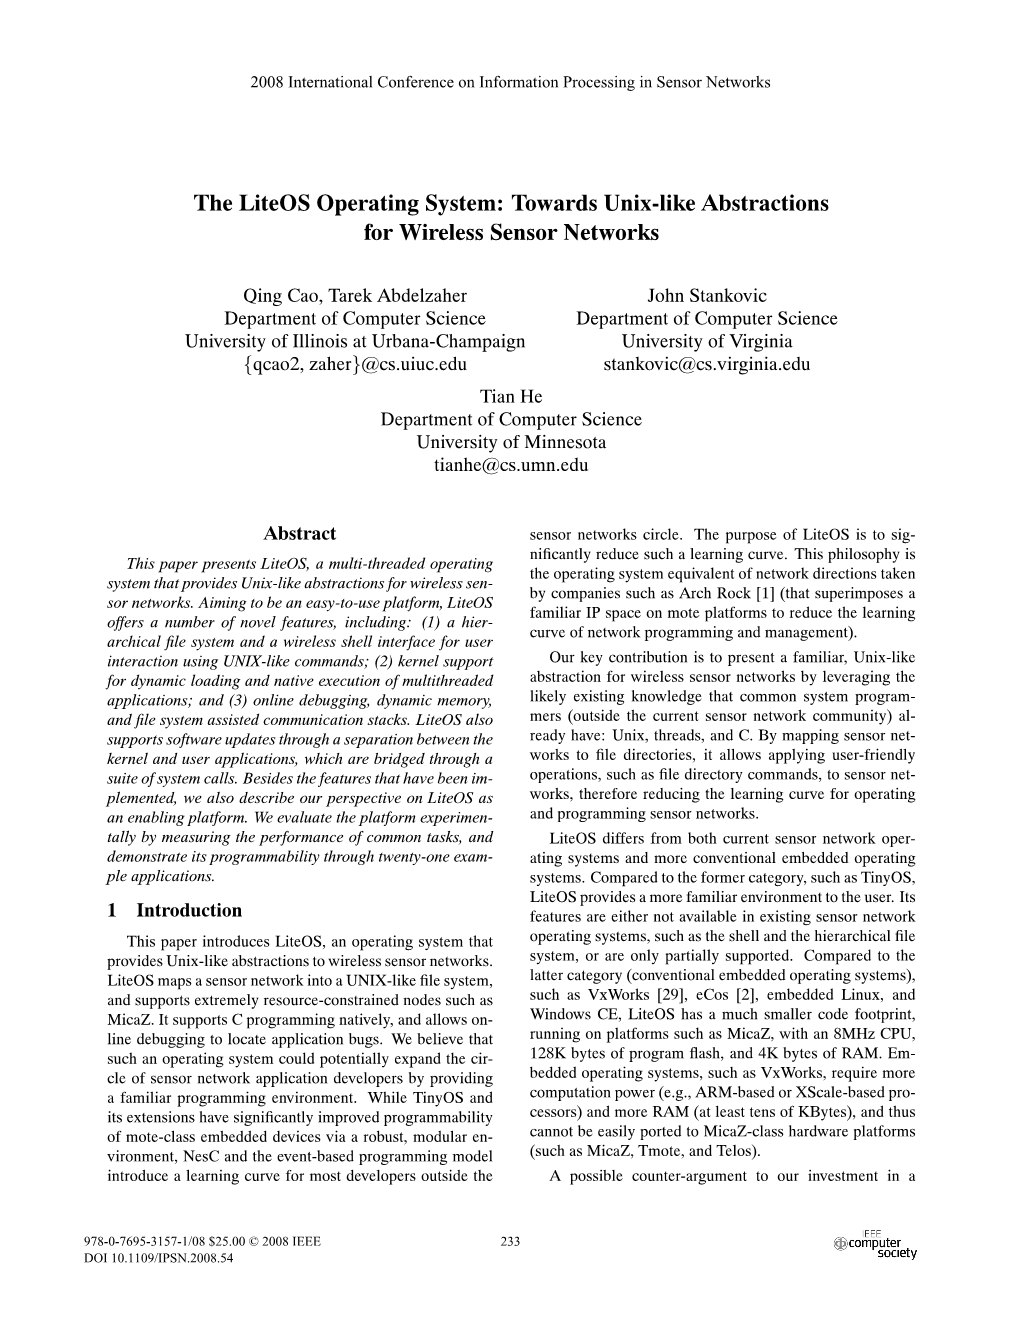 The Liteos Operating System: Towards Unix-Like Abstractions for Wireless Sensor Networks